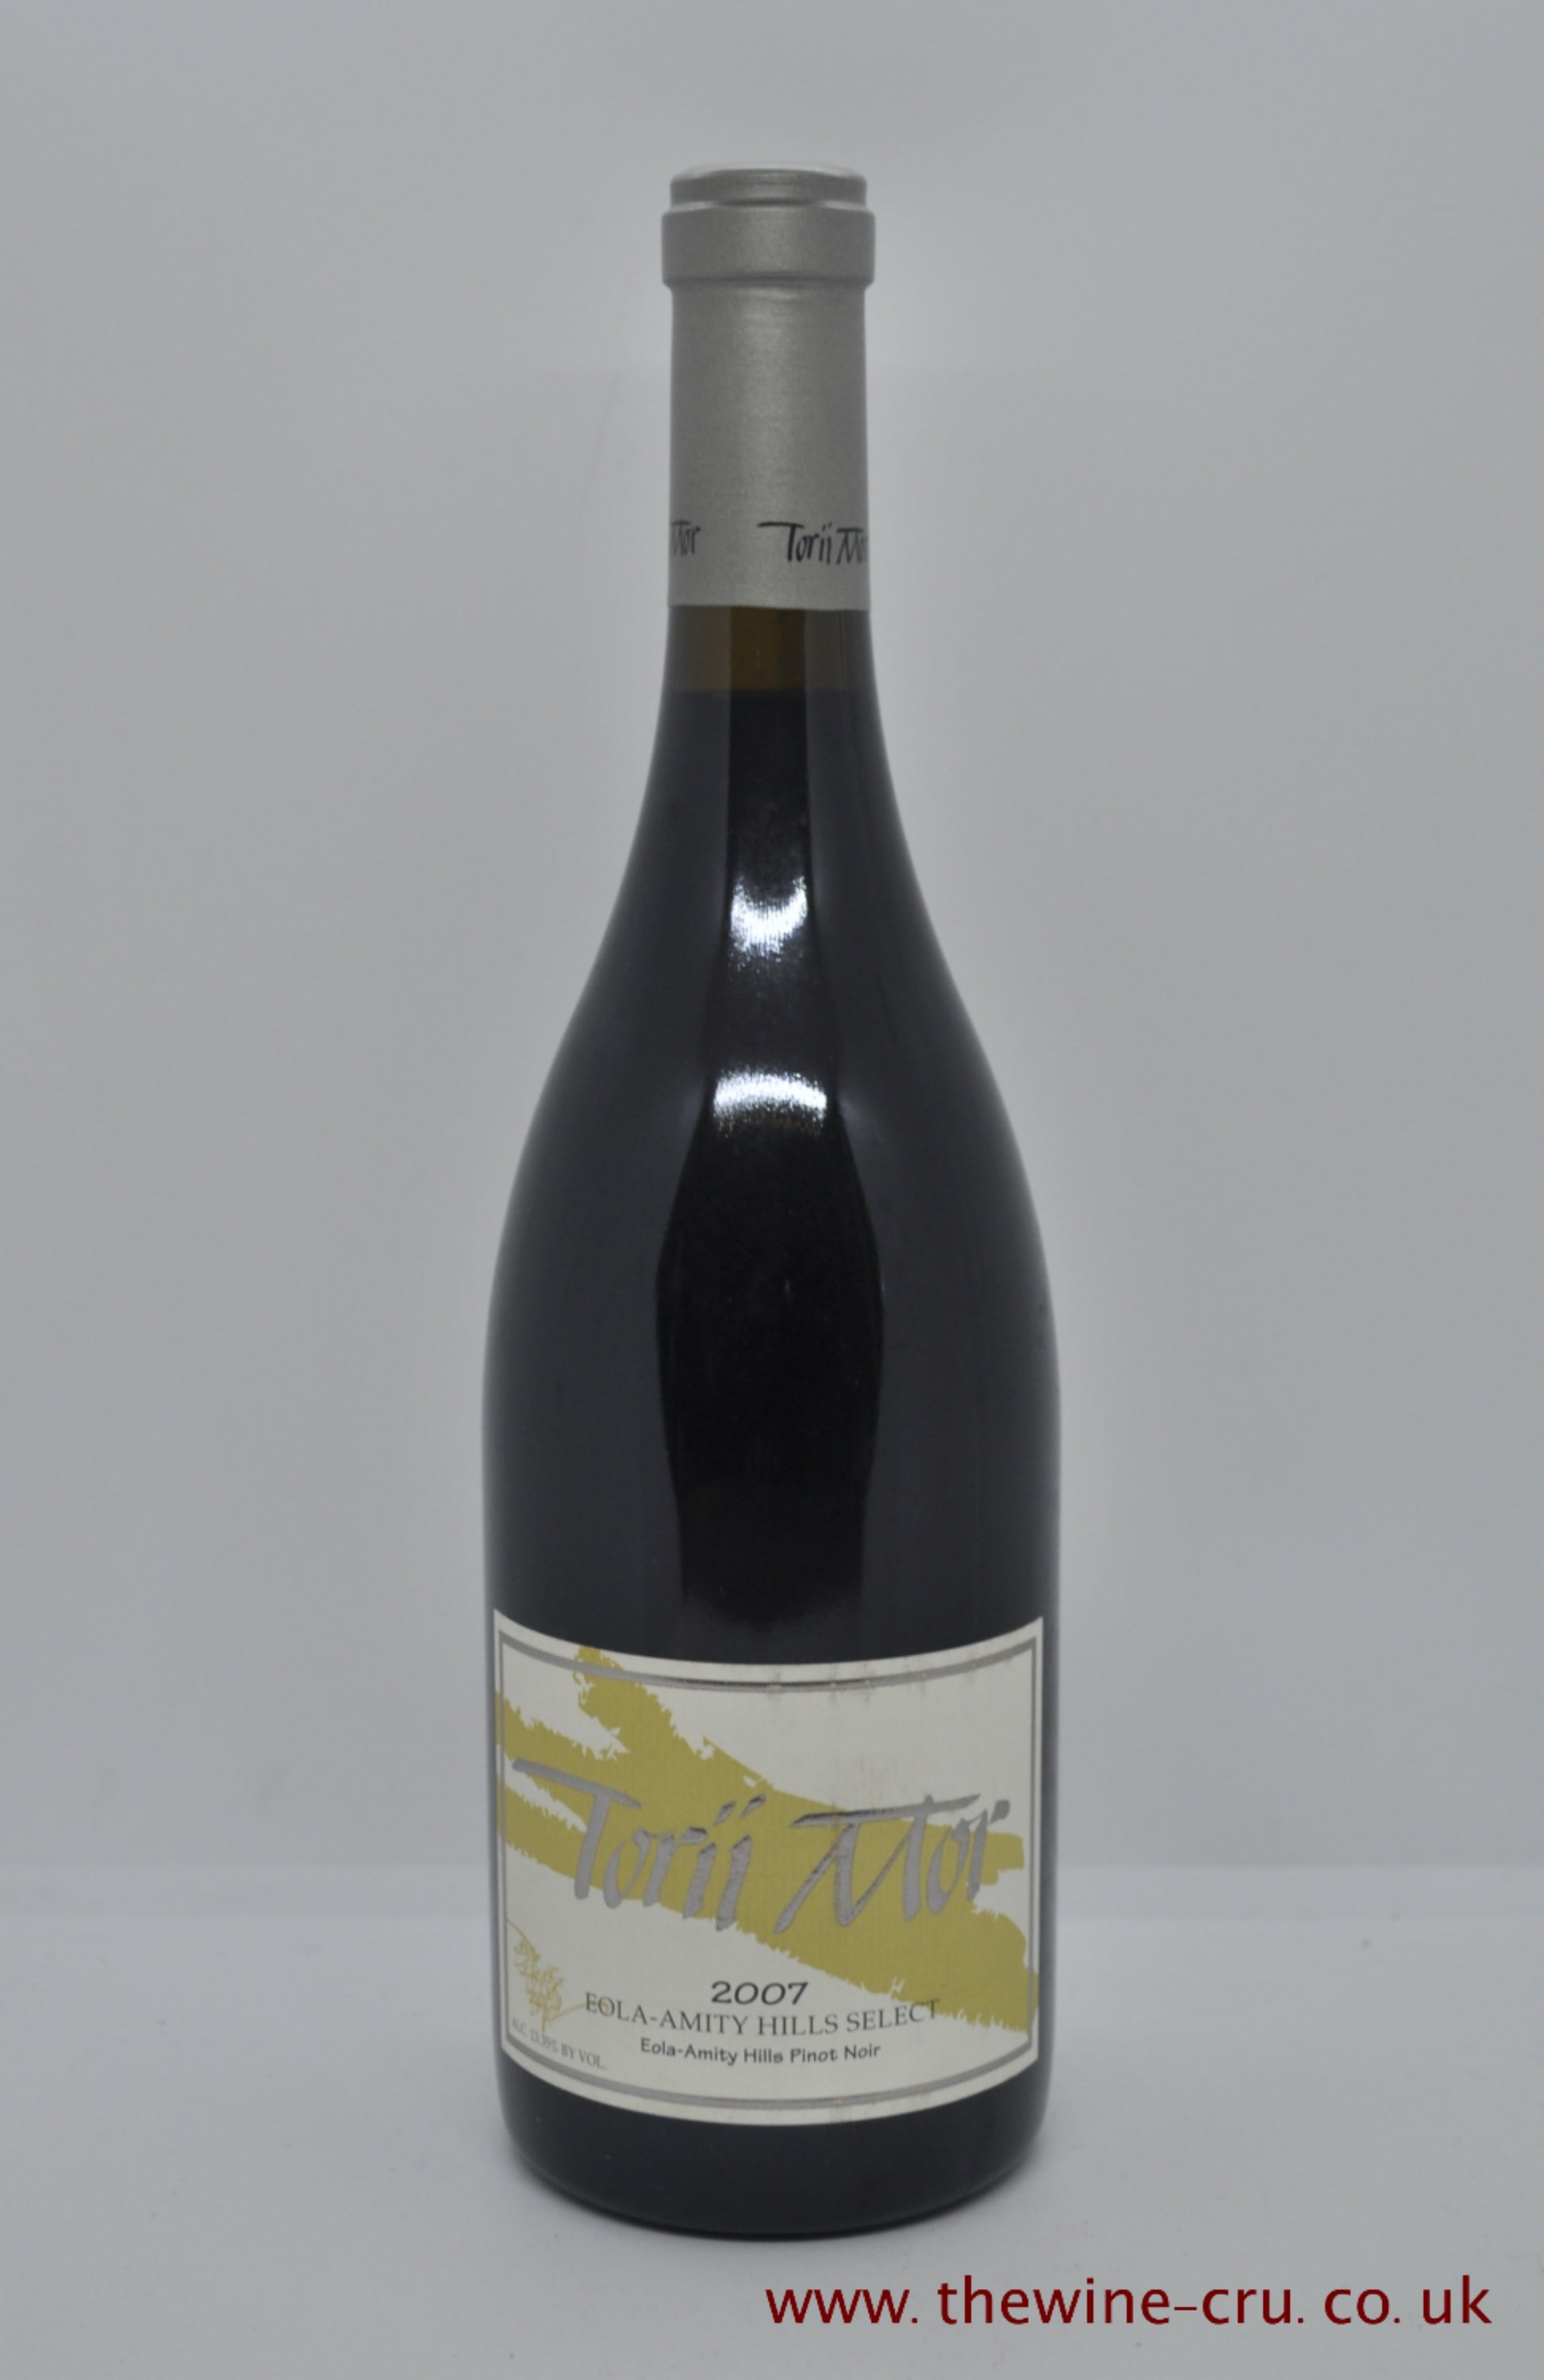 2007 vintage red wine. Torii Mor Eola-Amity Hills Select 2007. USA. Immediate delivery UK. Free local delivery.